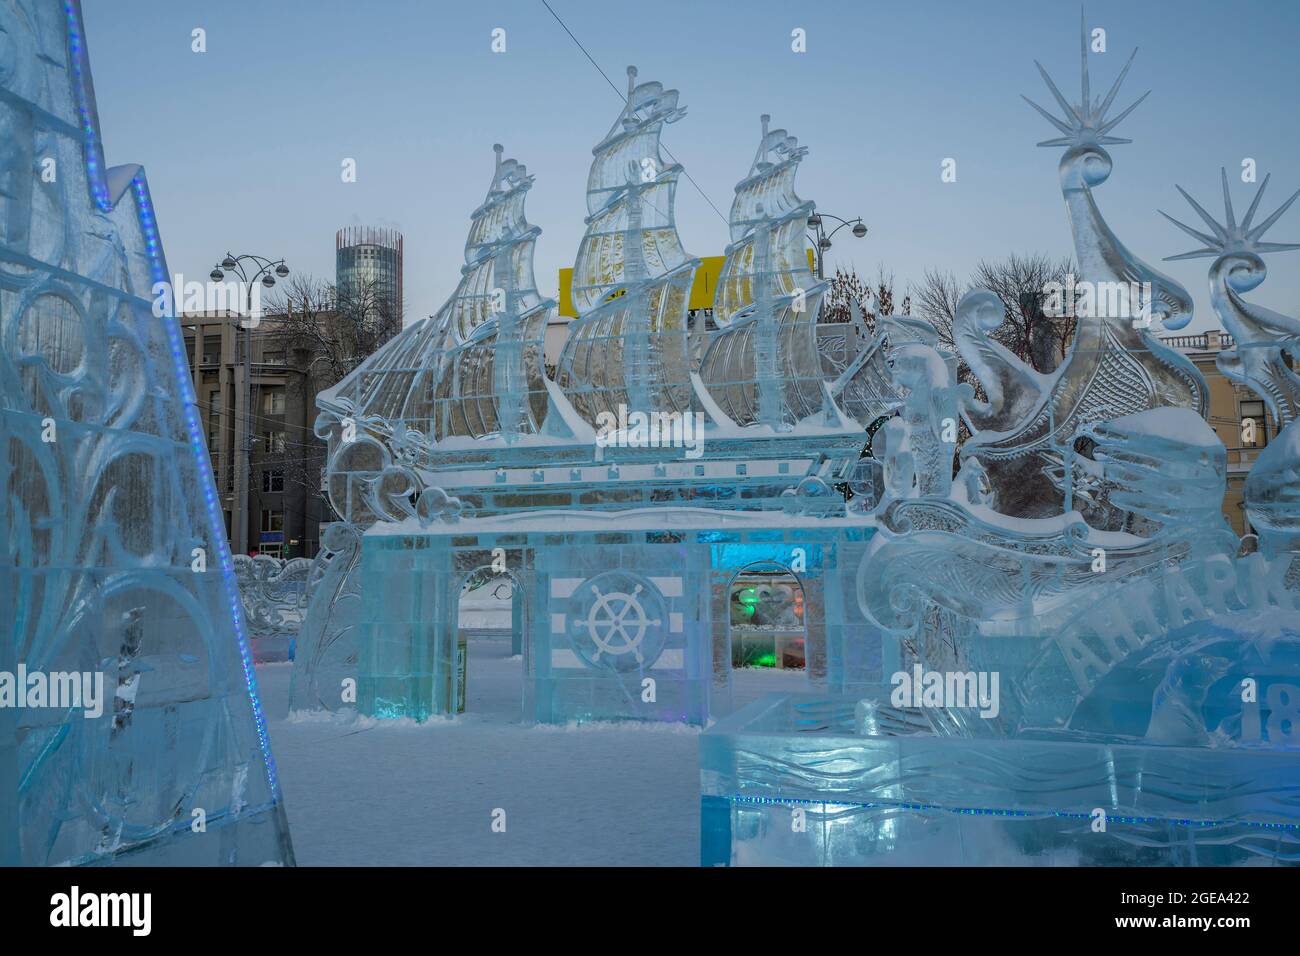 Intricate sculptures of endless design populate a community ice village in Yekaterinburg in Russia. Stock Photo